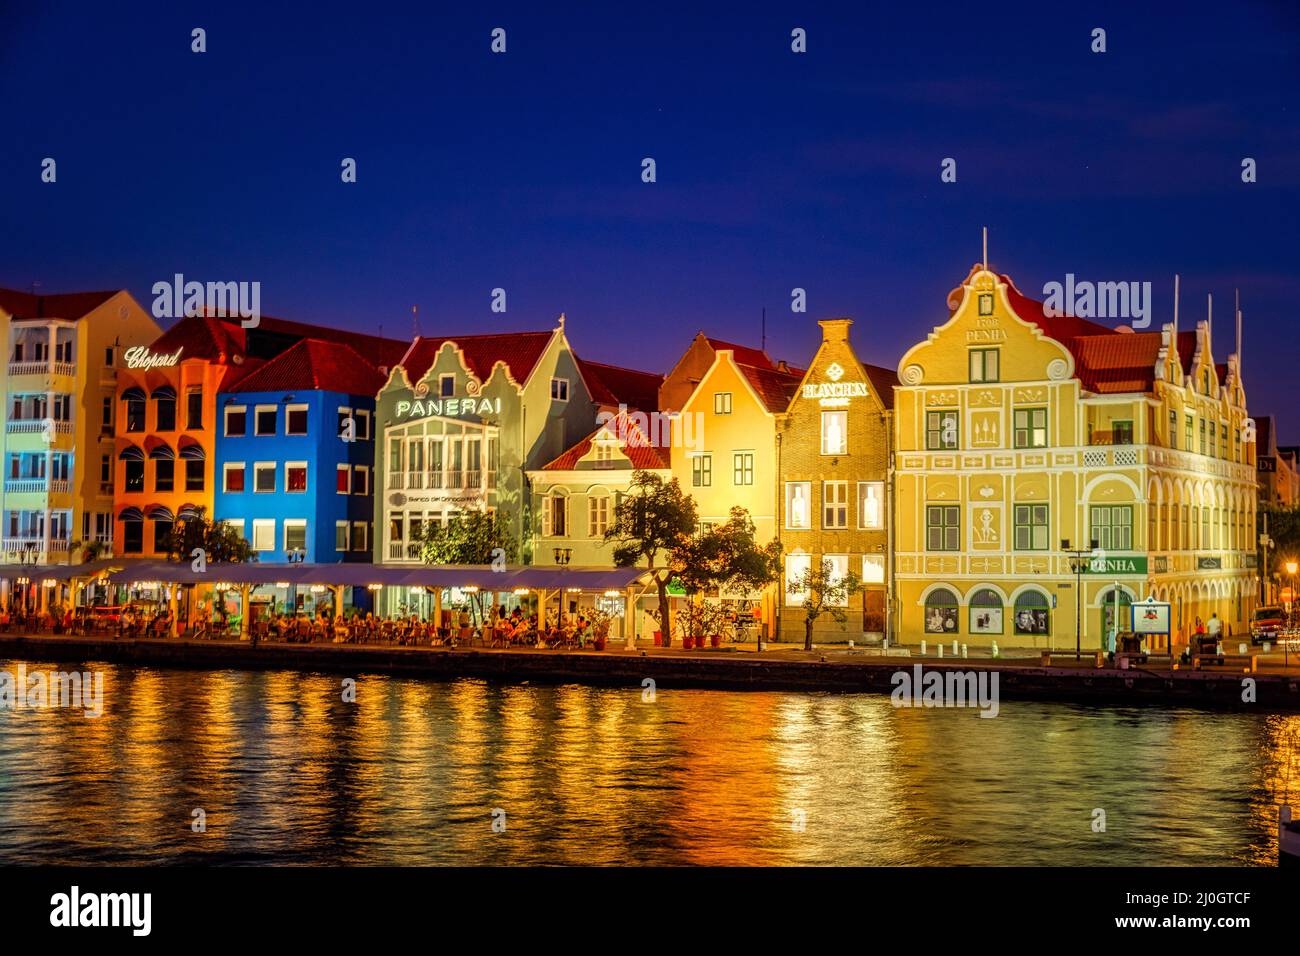 Willemstad, Curacao. Dutch Antilles. Colourful Buildings attracting tourists from all over the world. Blue sky sunny day Curacao Stock Photo